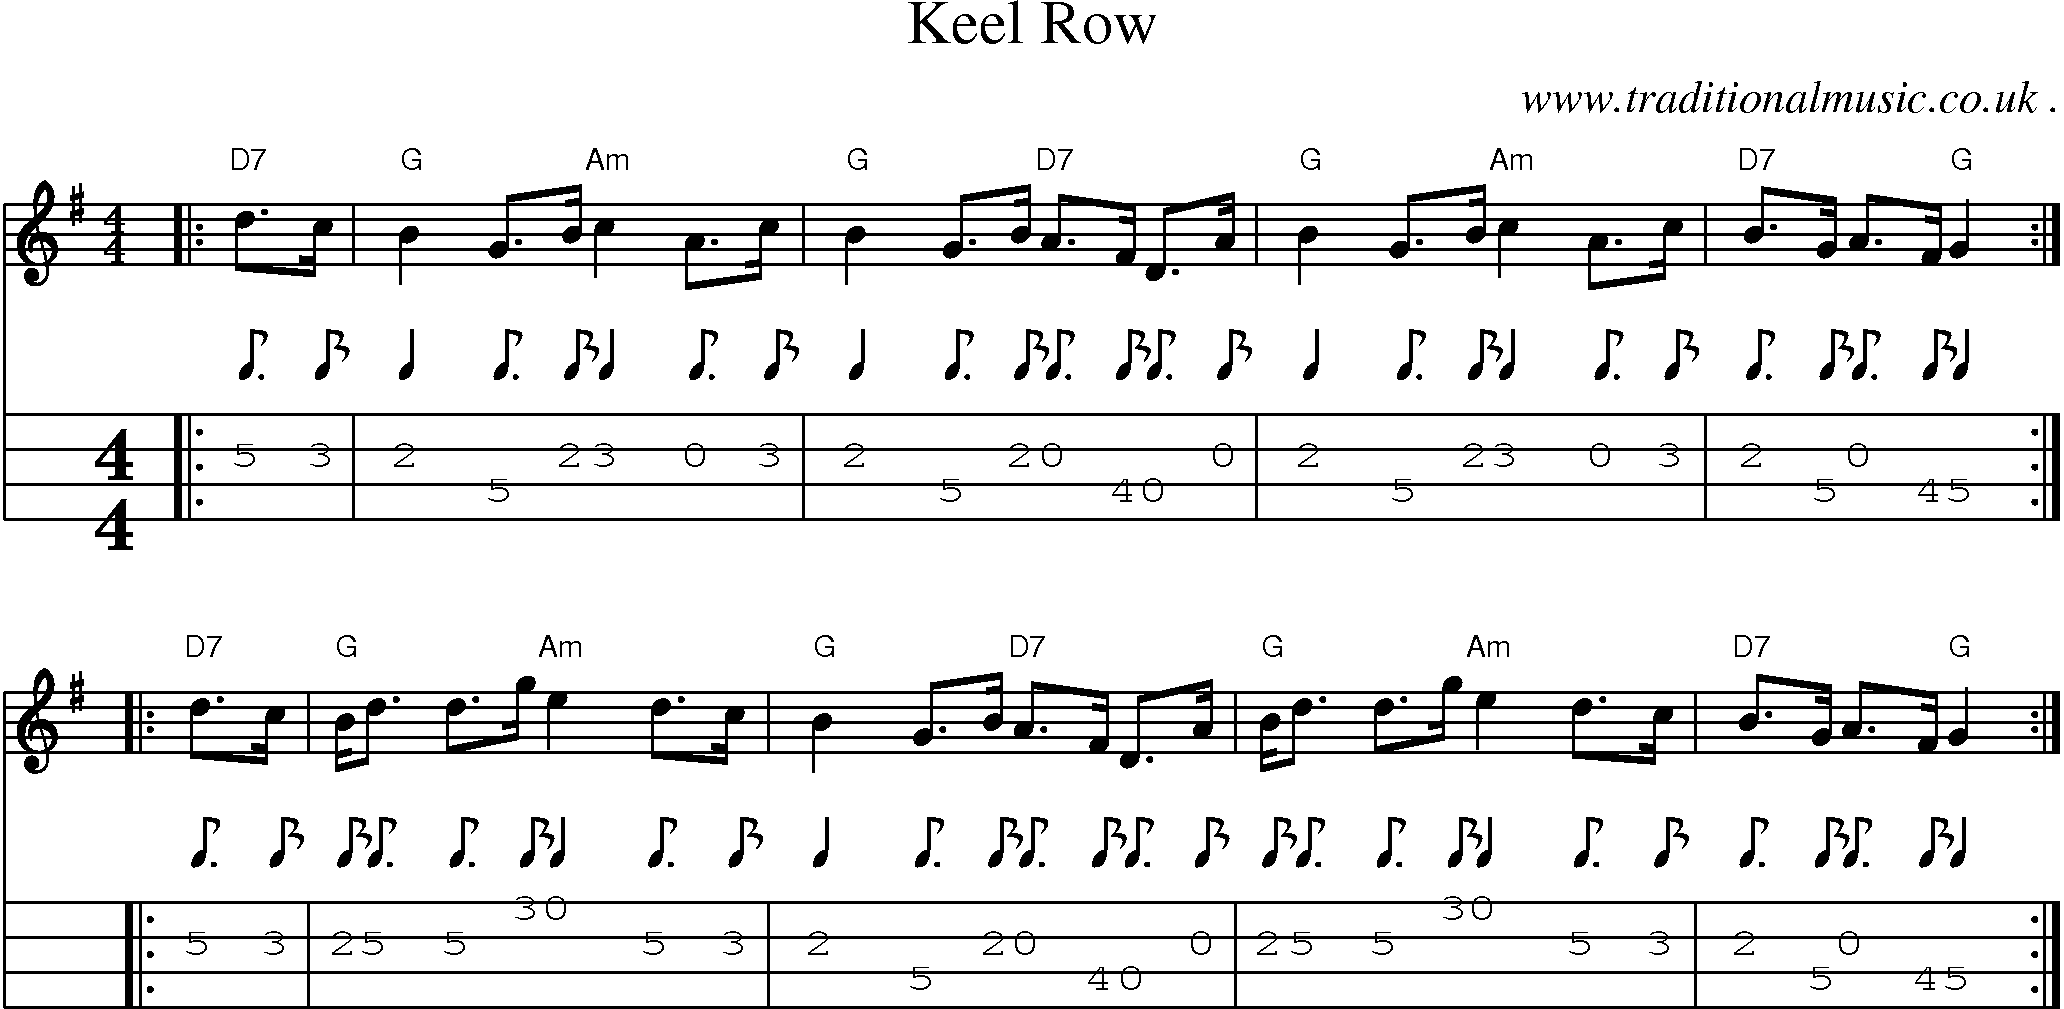 Sheet-music  score, Chords and Mandolin Tabs for Keel Row